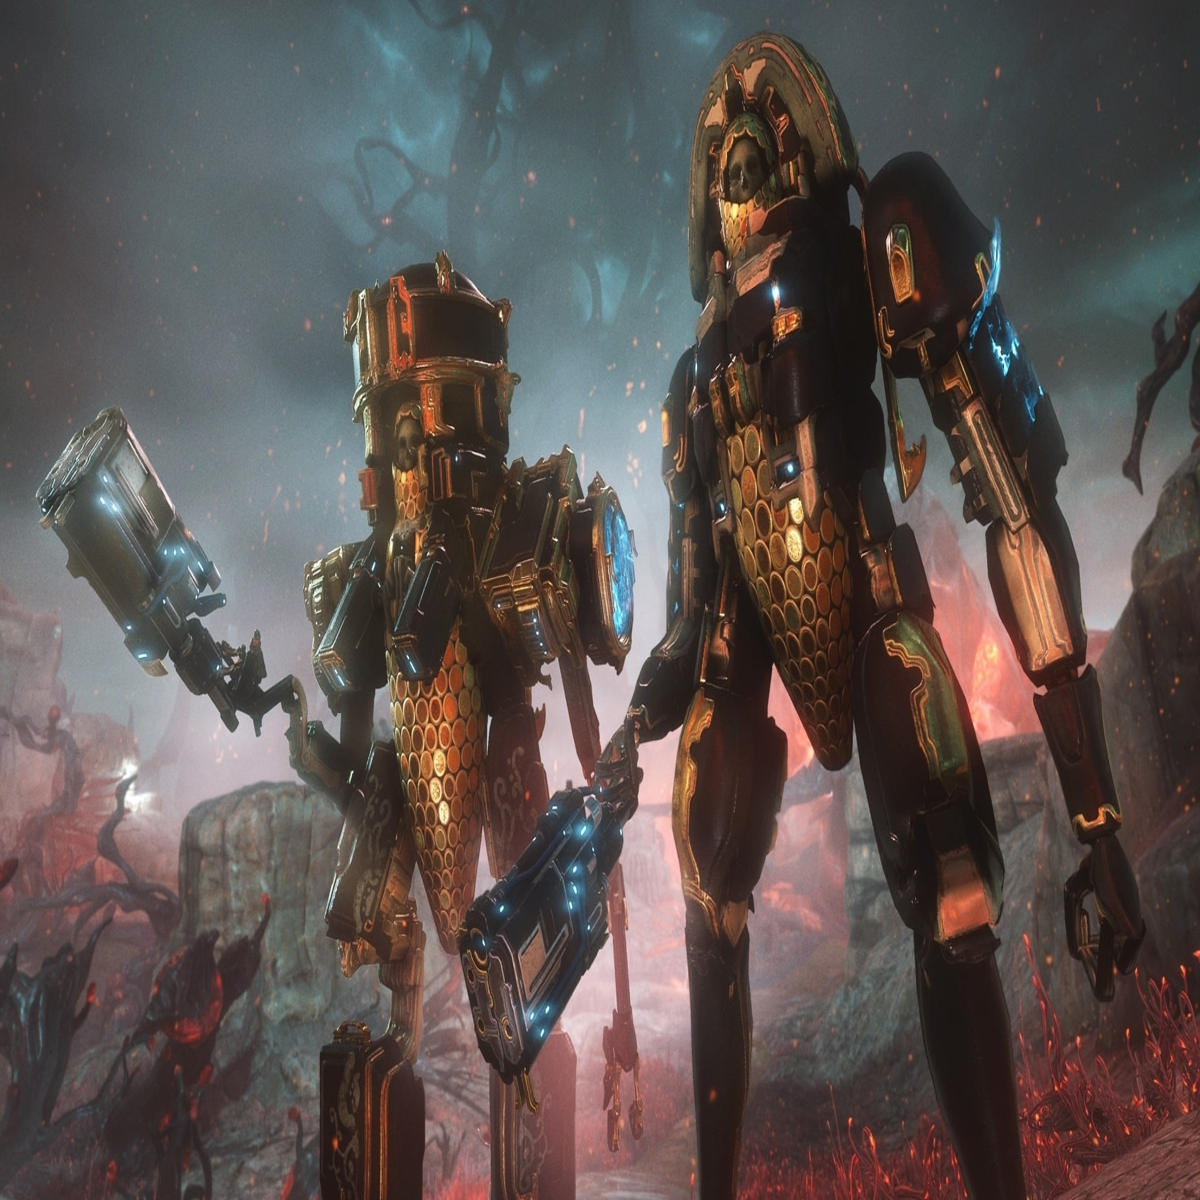 Warframe crossplay has officially launched on consoles & PC